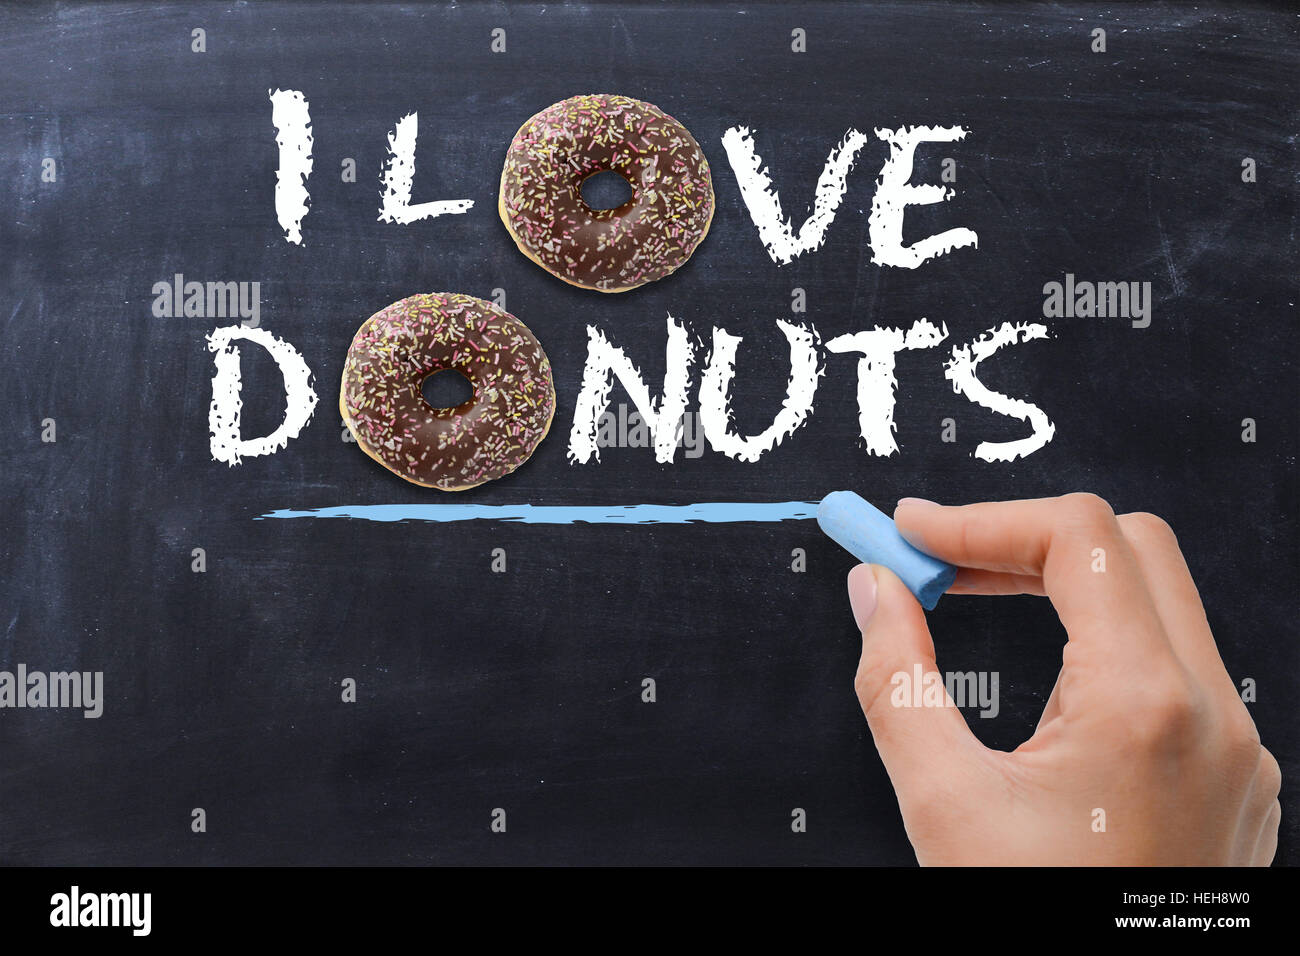 “I love donuts” concept with tasty chocolate donut on dark background Stock Photo